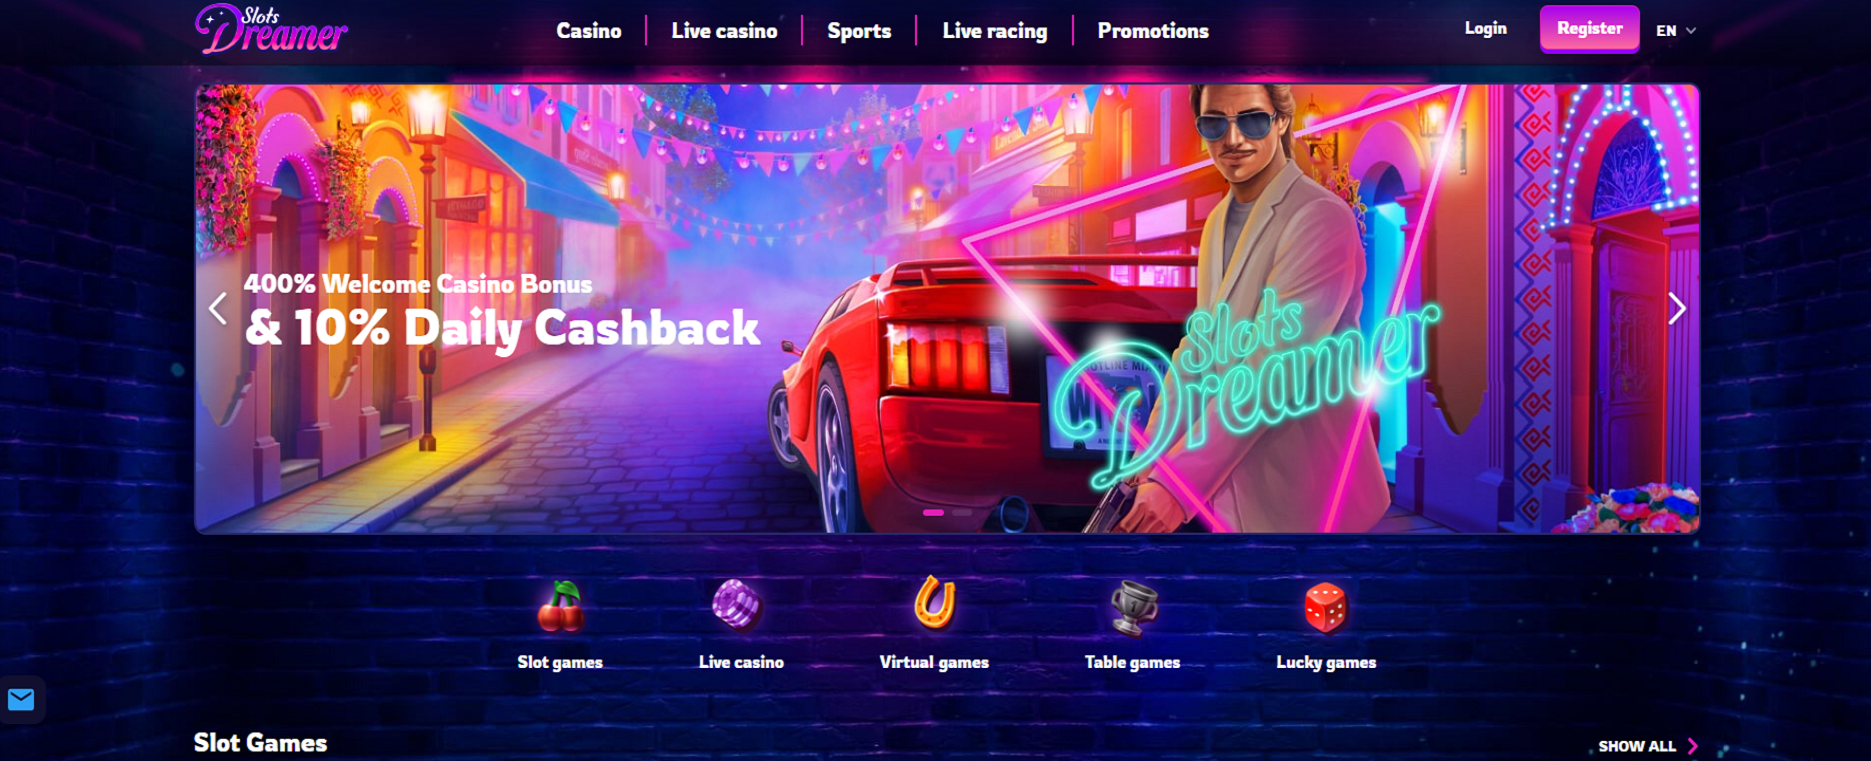 Learn How To Start casinos with no uk license